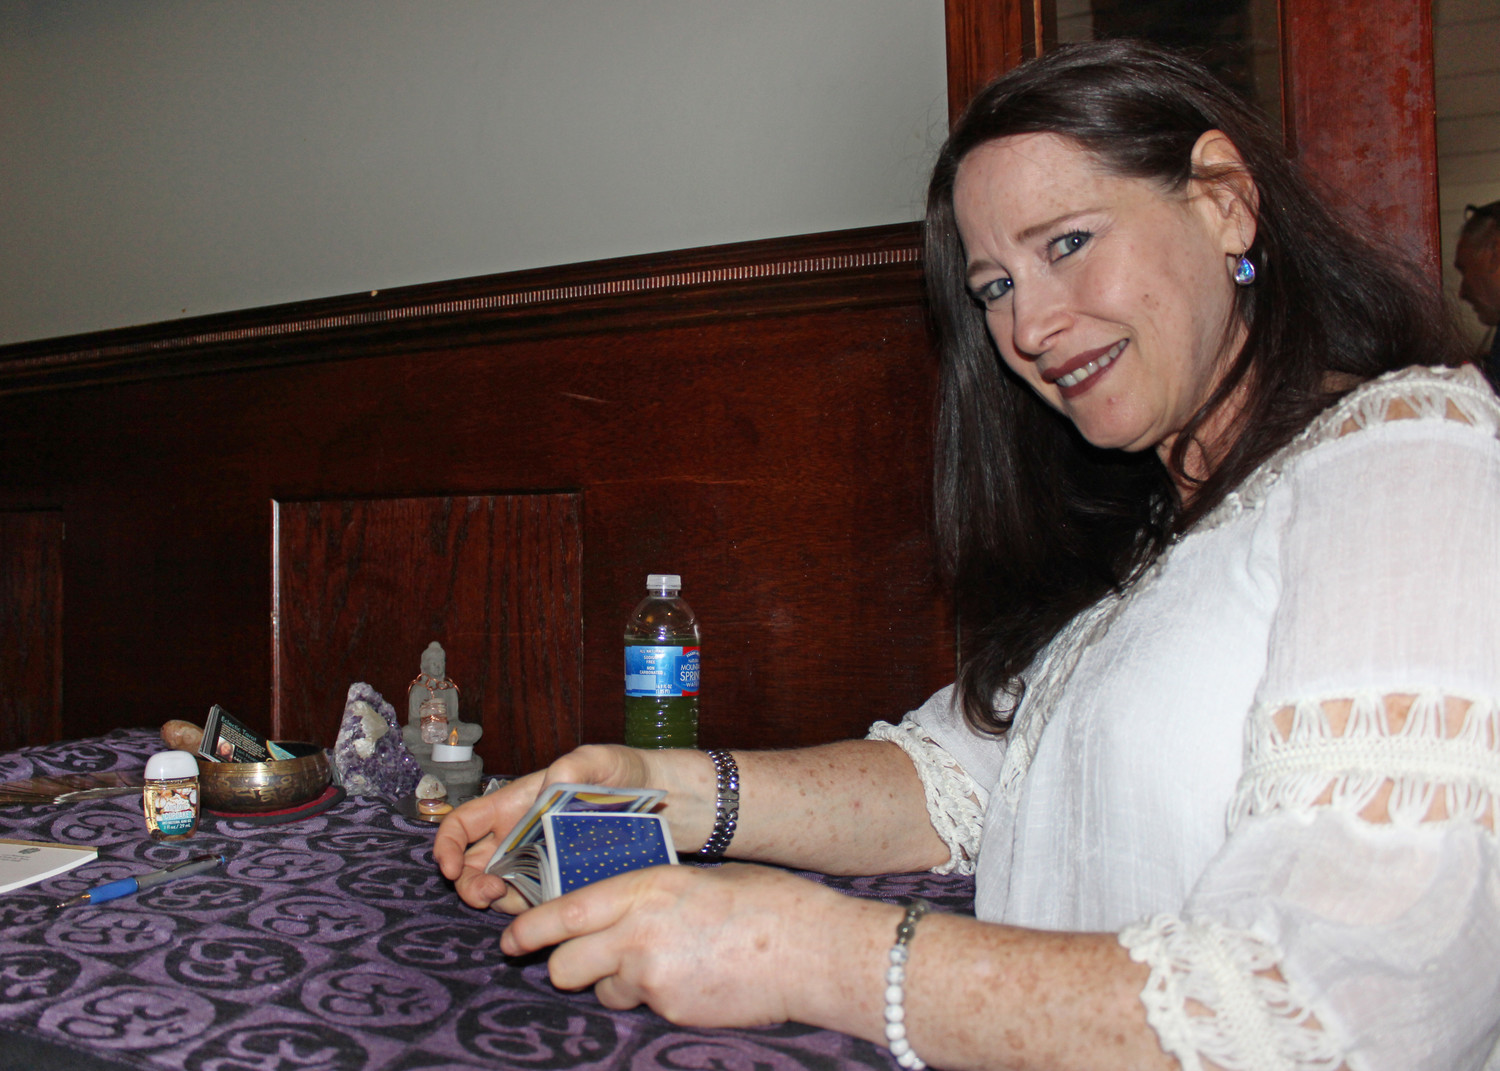 Tarot card reader Lori Nostramo prepared to engage in a spiritual experience with guests at Psychic Night on Aug. 20 at Borrelli’s Italian Restaurant in East Meadow.